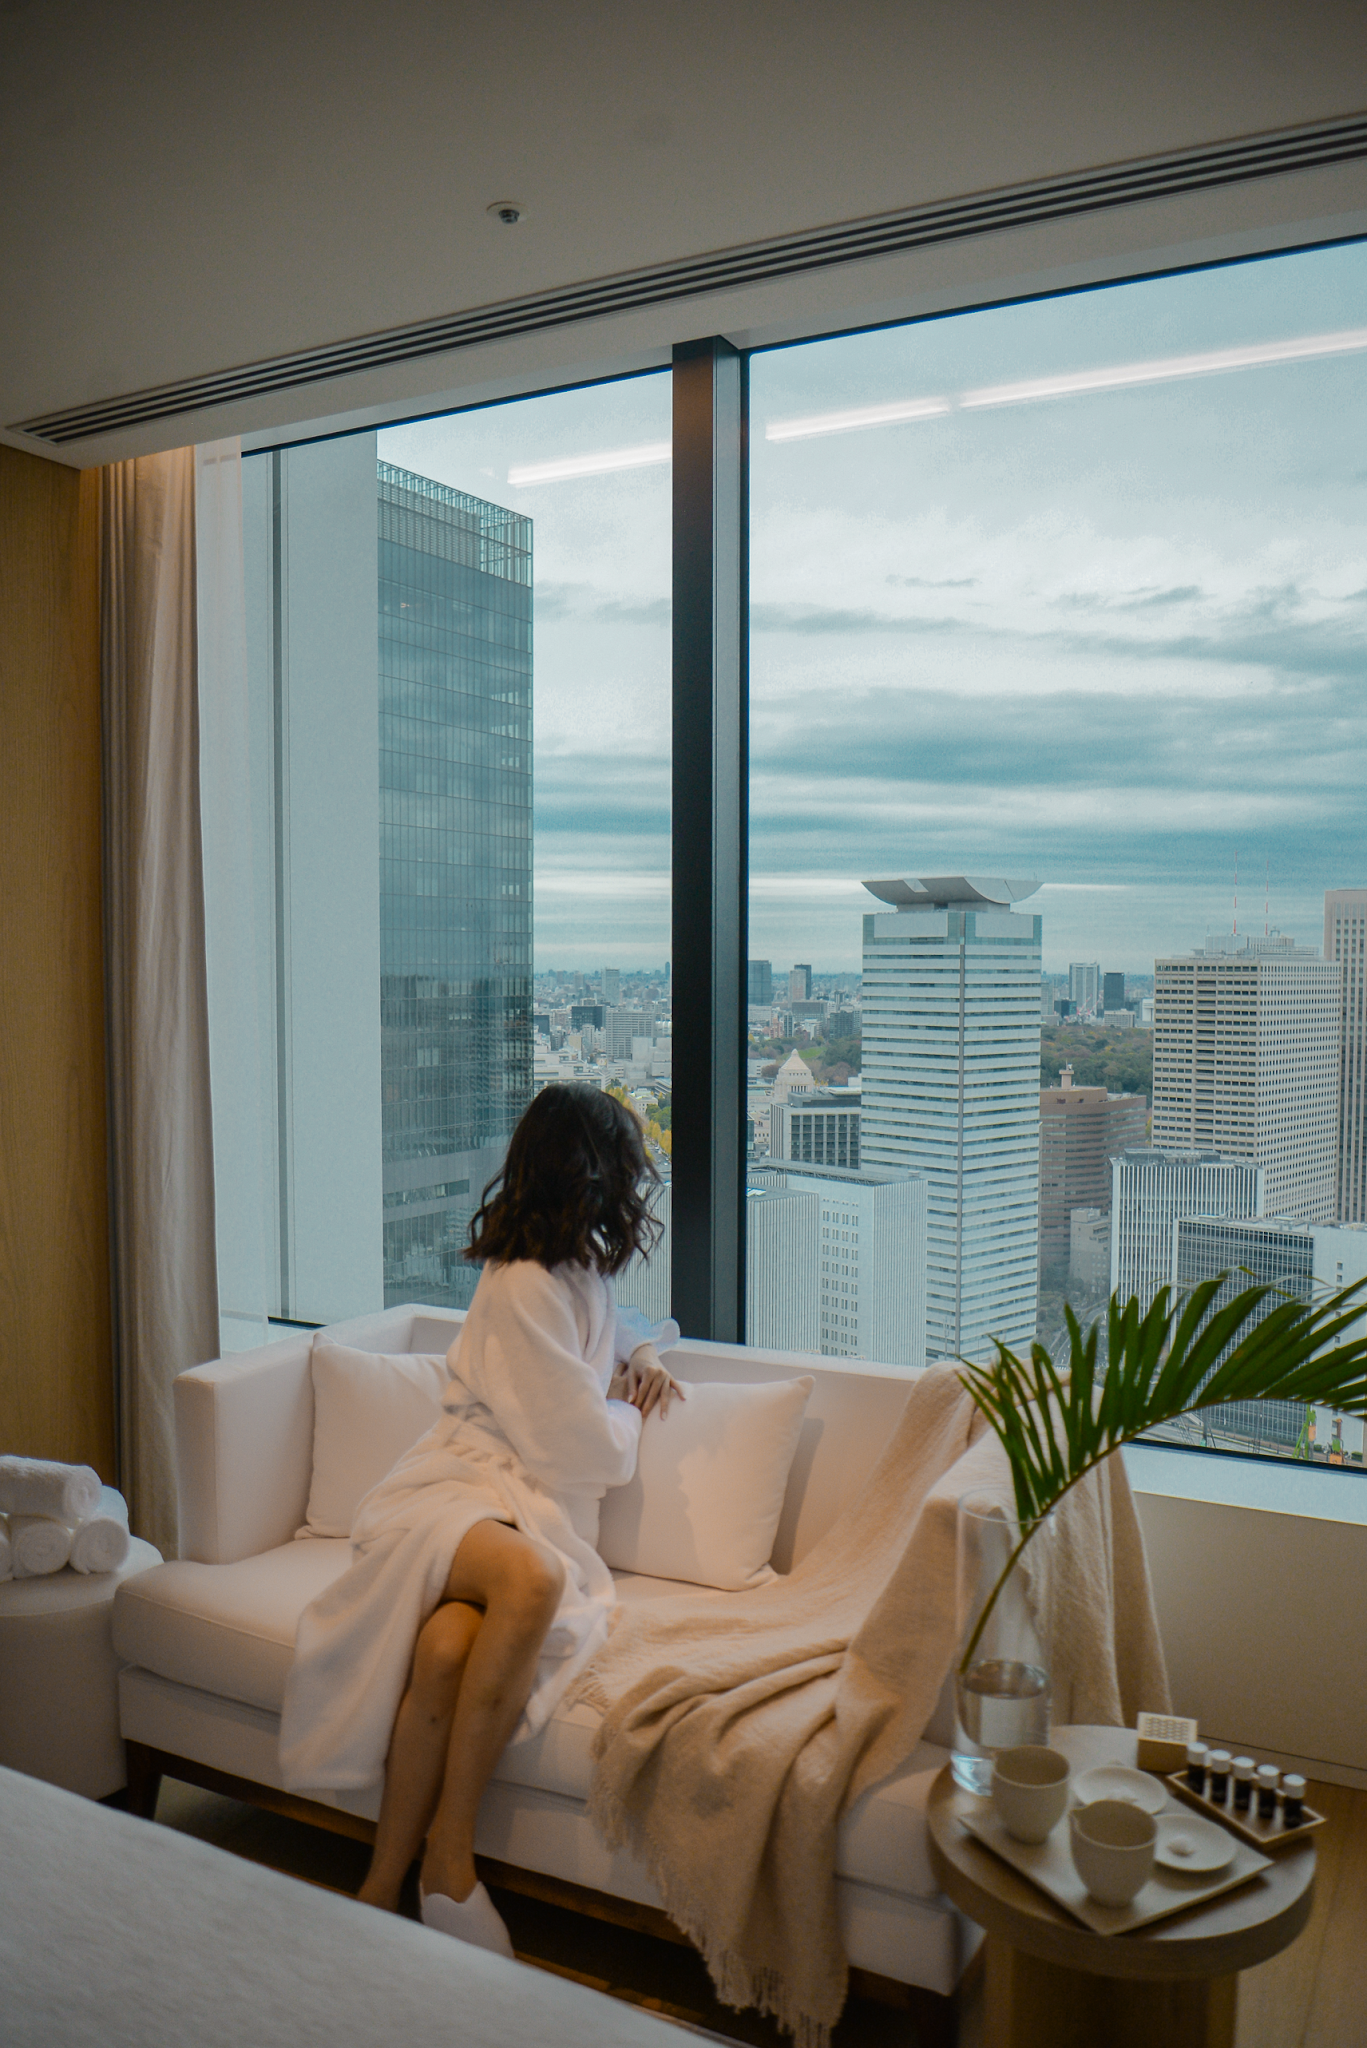 Spa at Toranomon EDITION hotel, Best new hotel in Tokyo 2020, Staycation at the Tokyo Edition Toranomon,  hotel staycation in Tokyo, Japan newest hotels, Tokyo Tower view hotels in Japan, best Tokyo skyline view with Tokyo Tower / FOREVERVANNY Travel and Style by Van Le